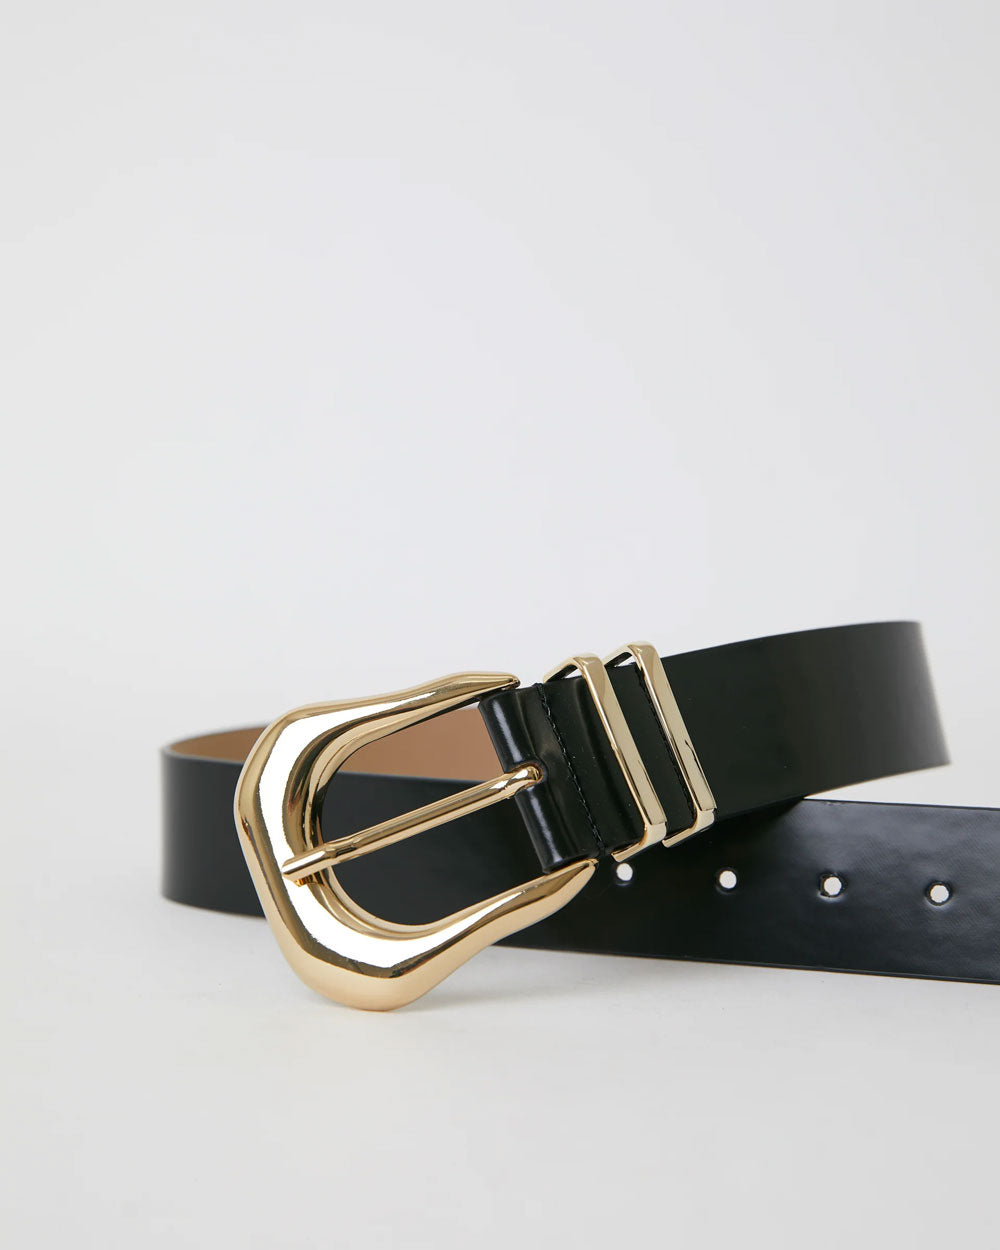 Koda Mod Leather Belt in Black and Gold